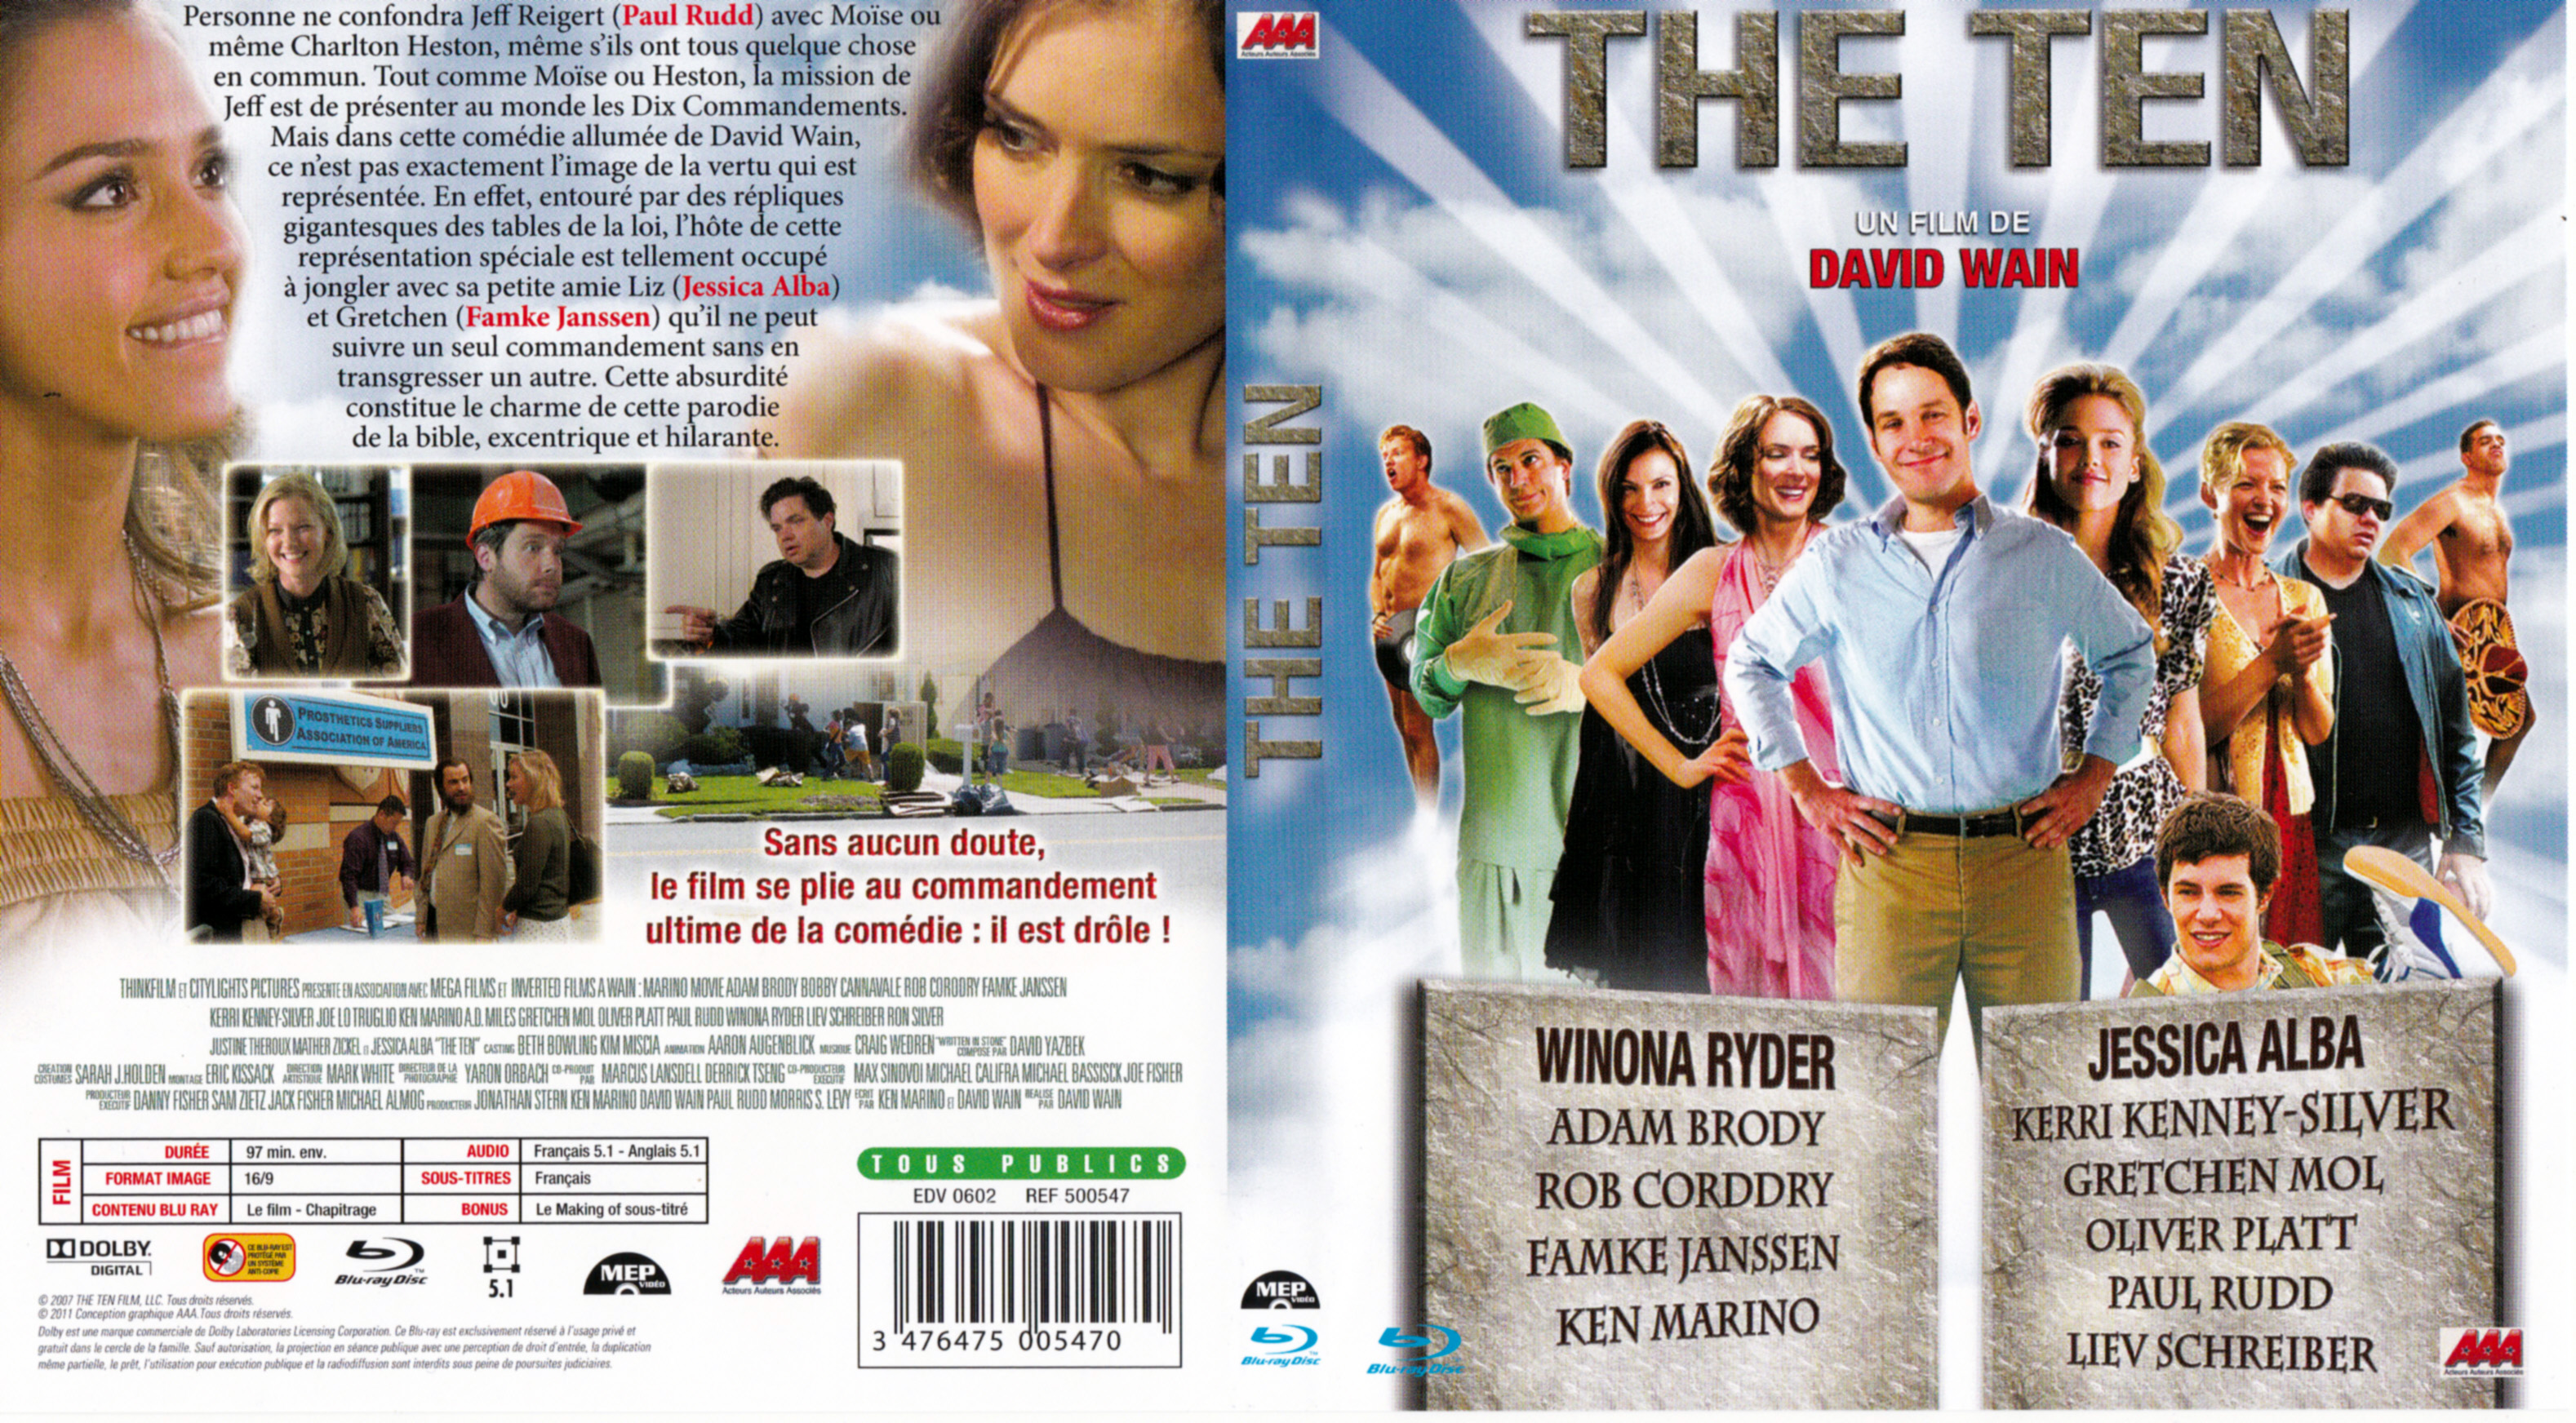 Jaquette DVD The Ten (BLU-RAY)